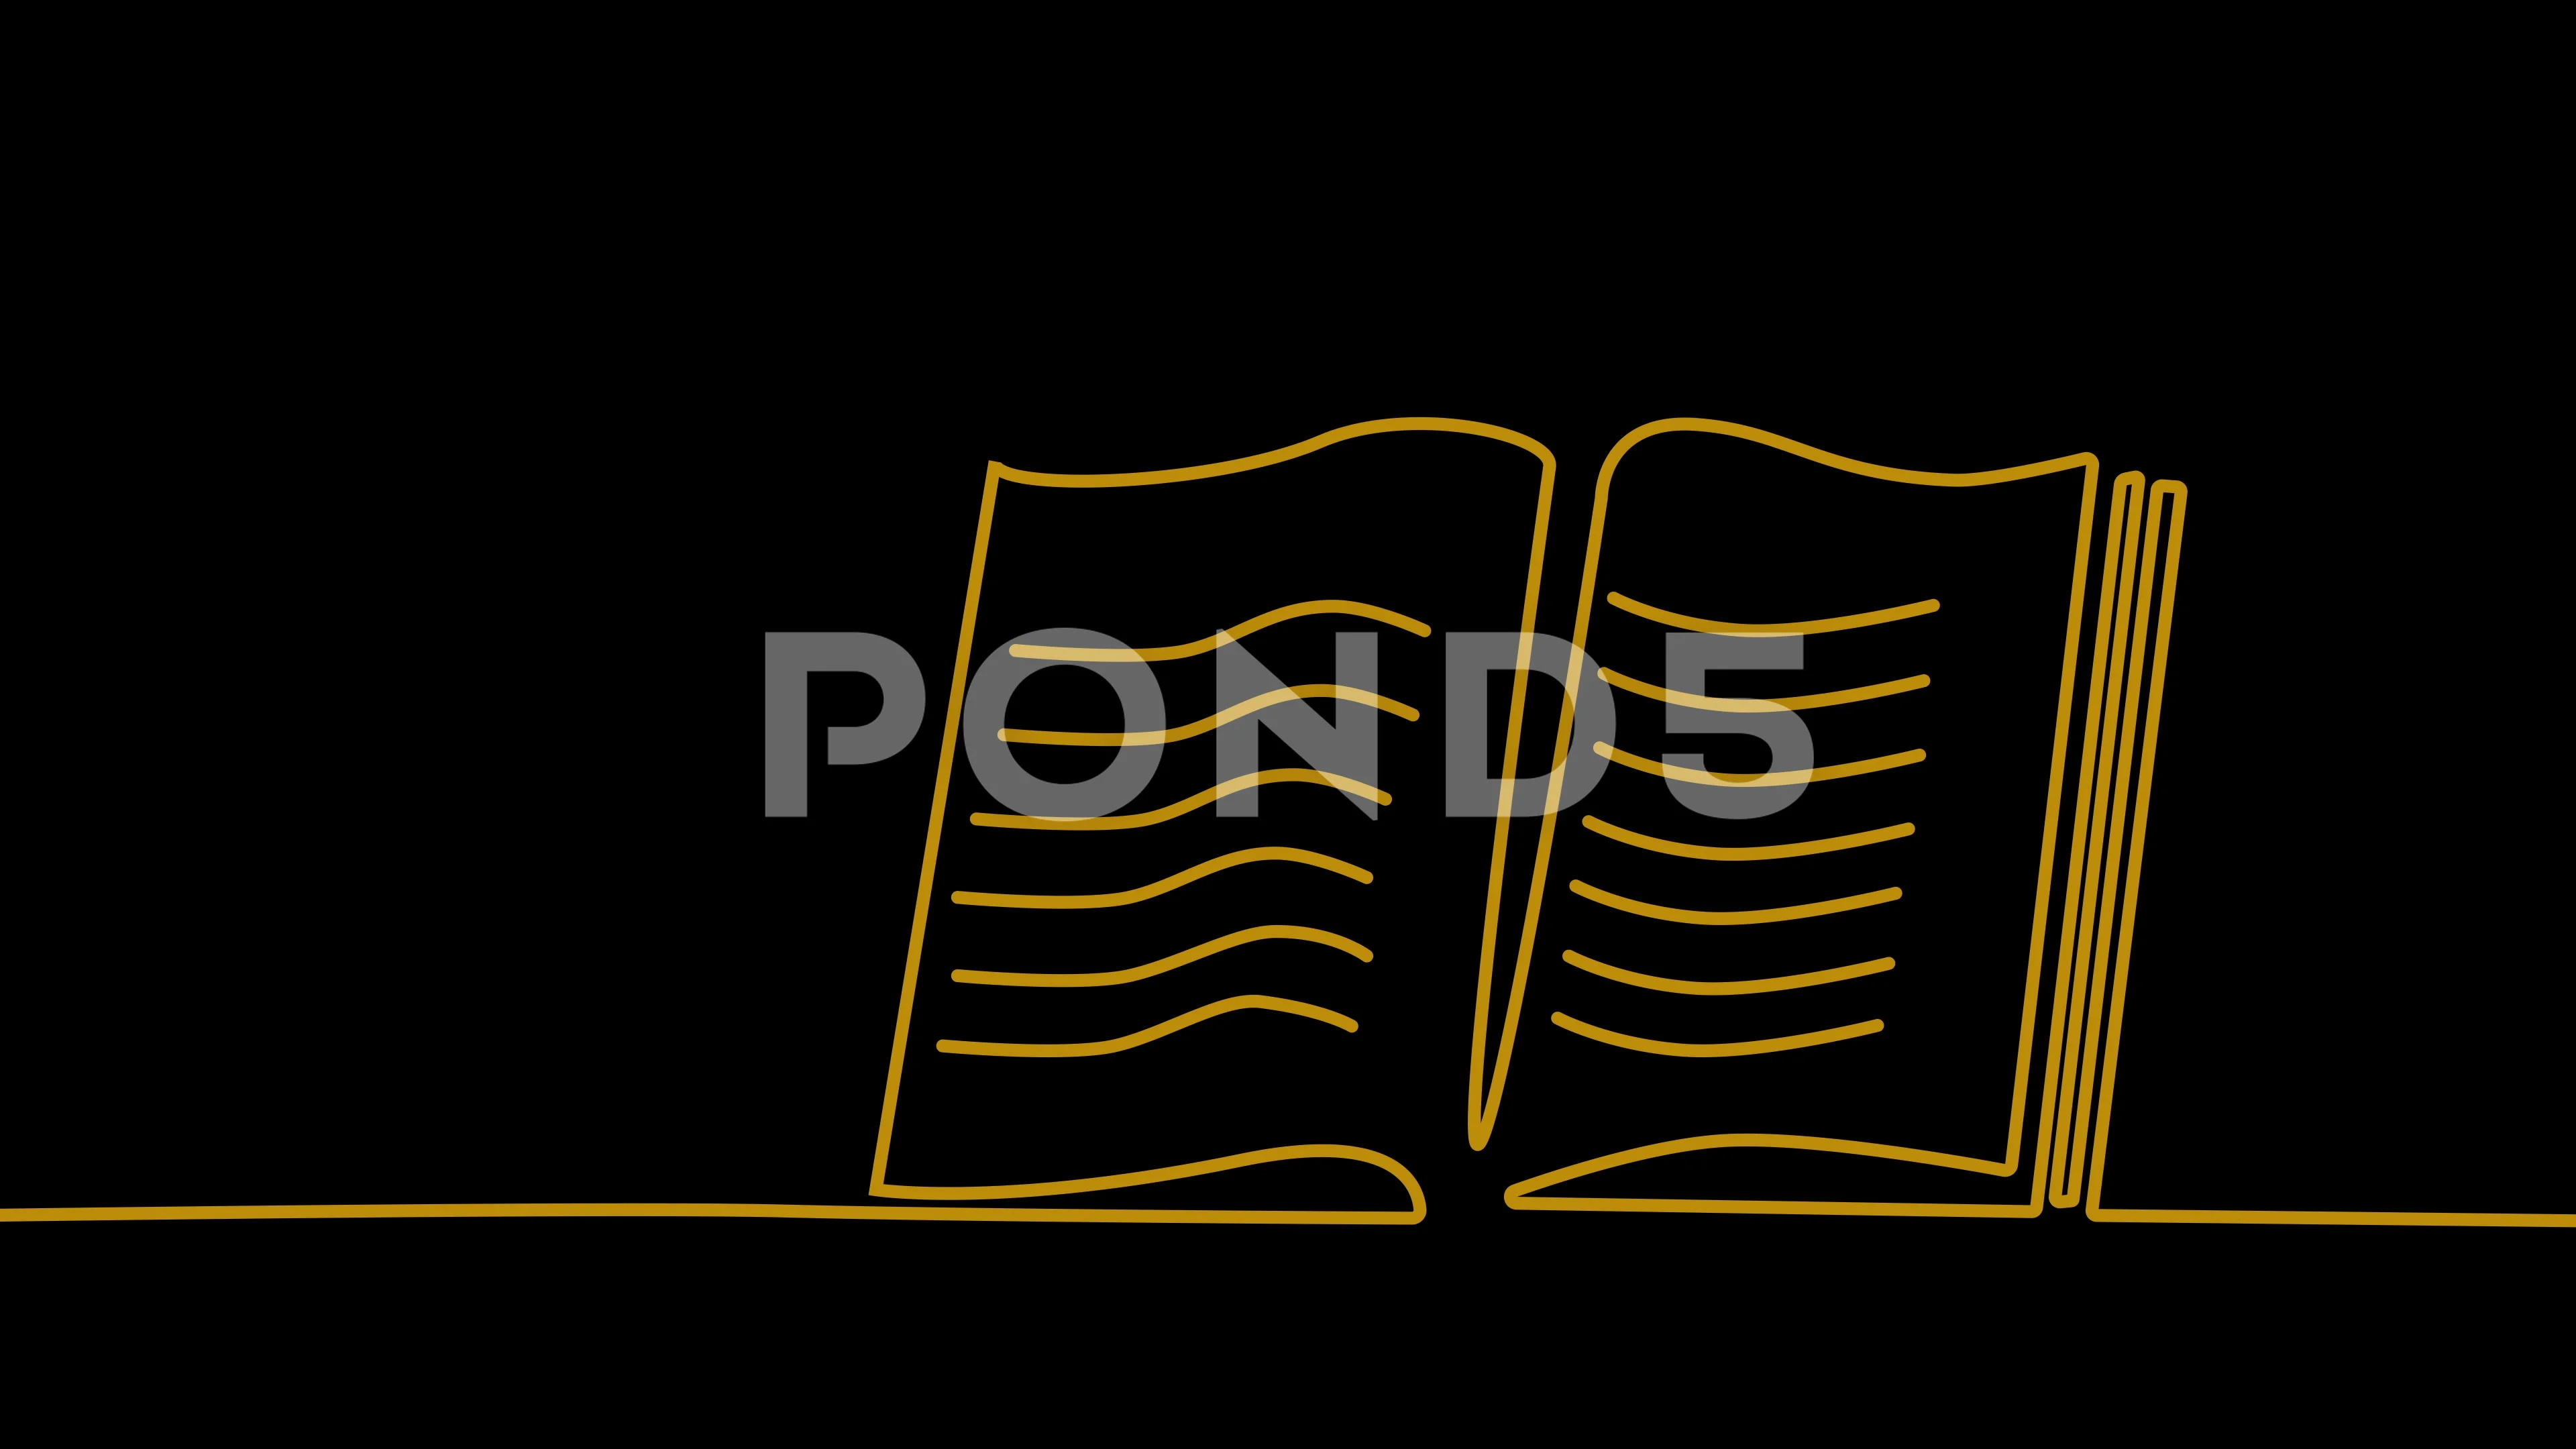 Self drawing animation of open book., Stock Video